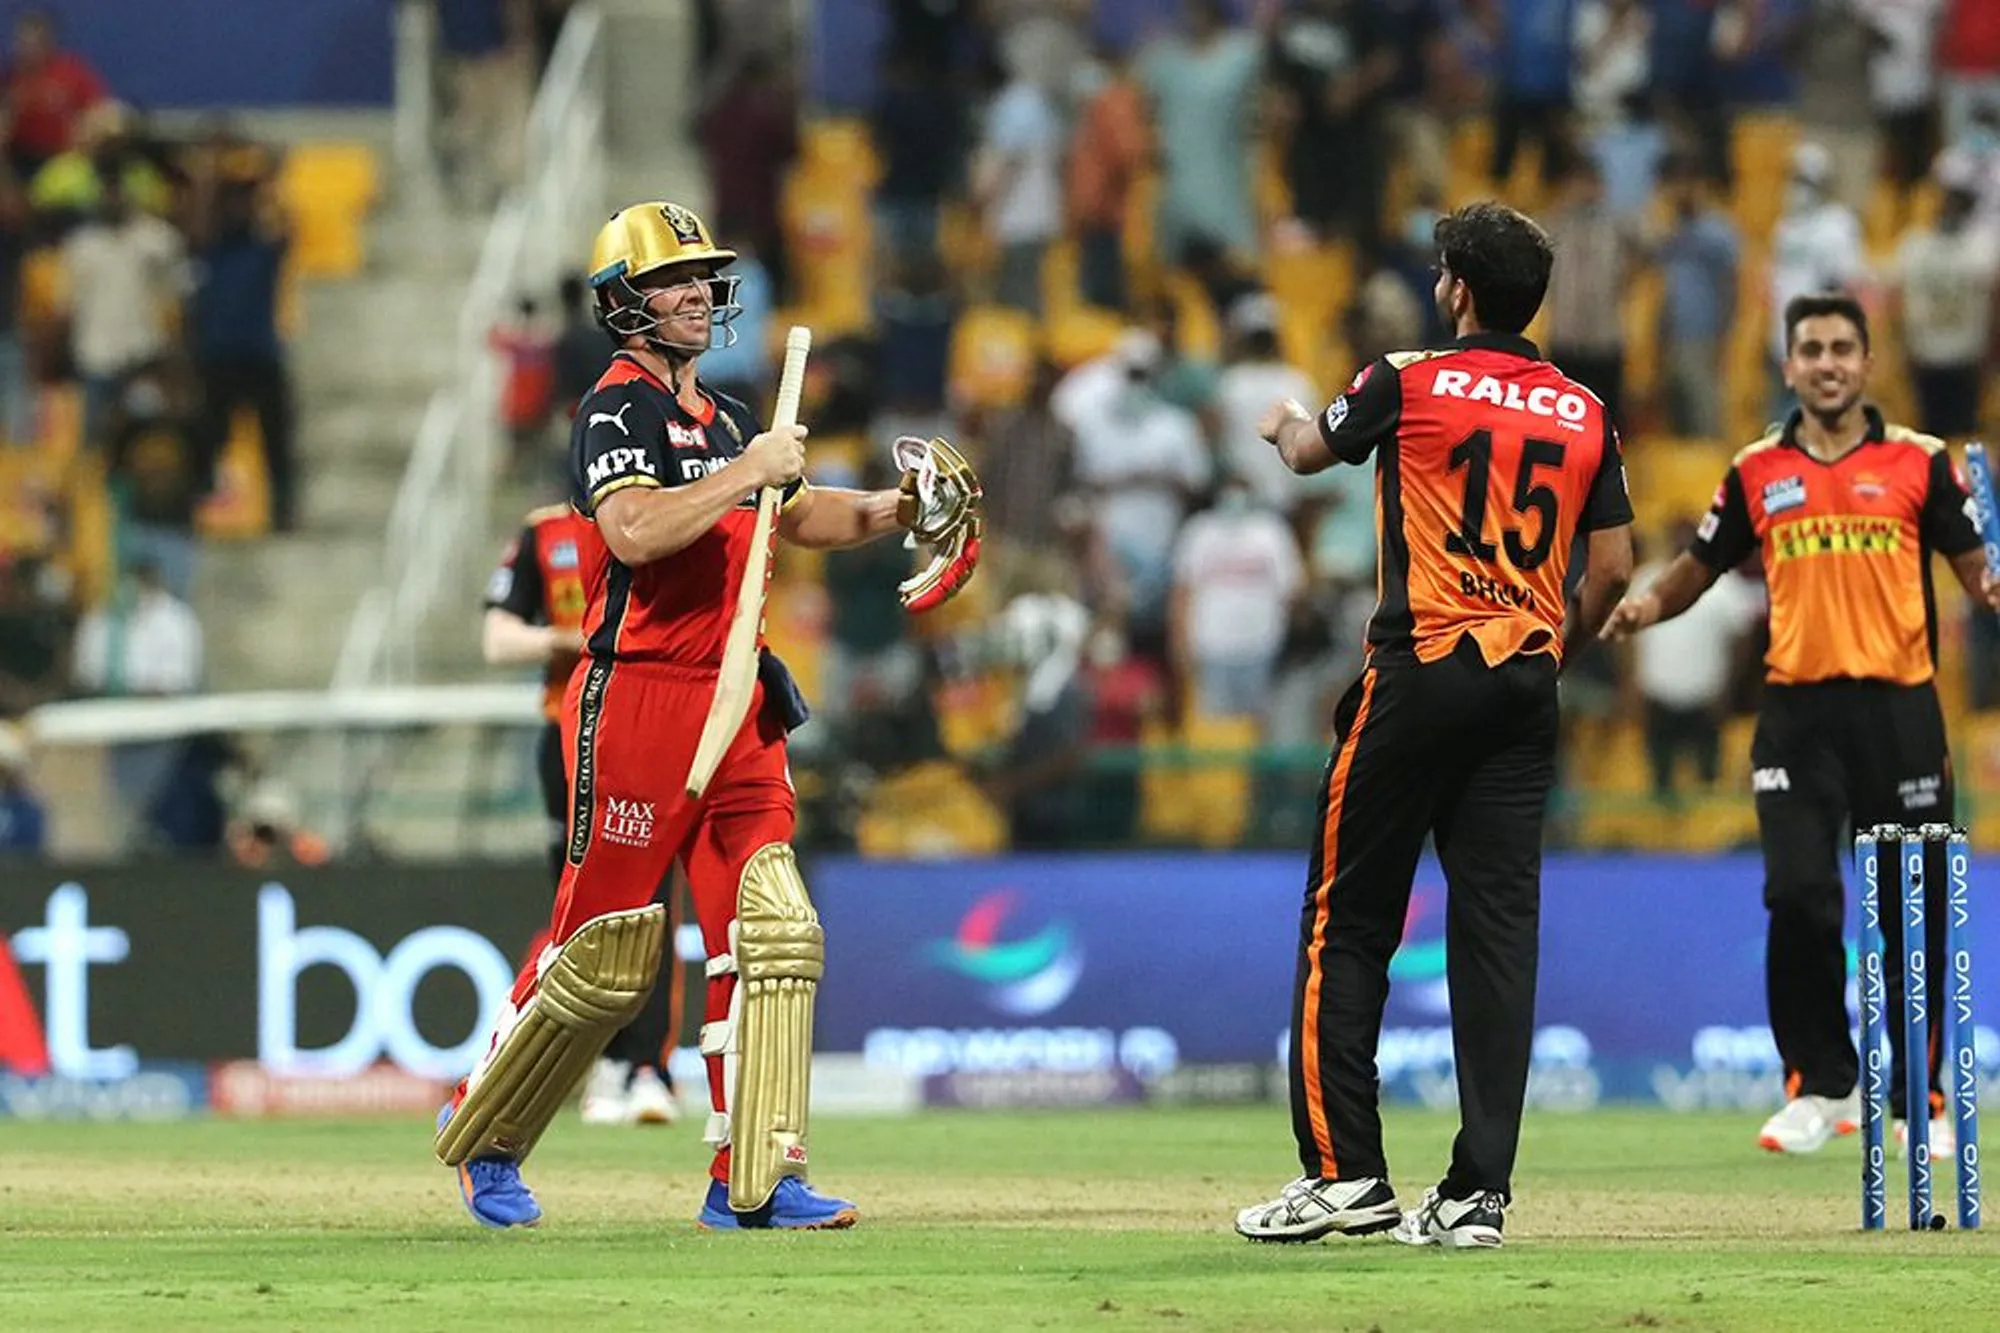 AB de Villiers for once couldn't win it for RCB | BCCI-IPL